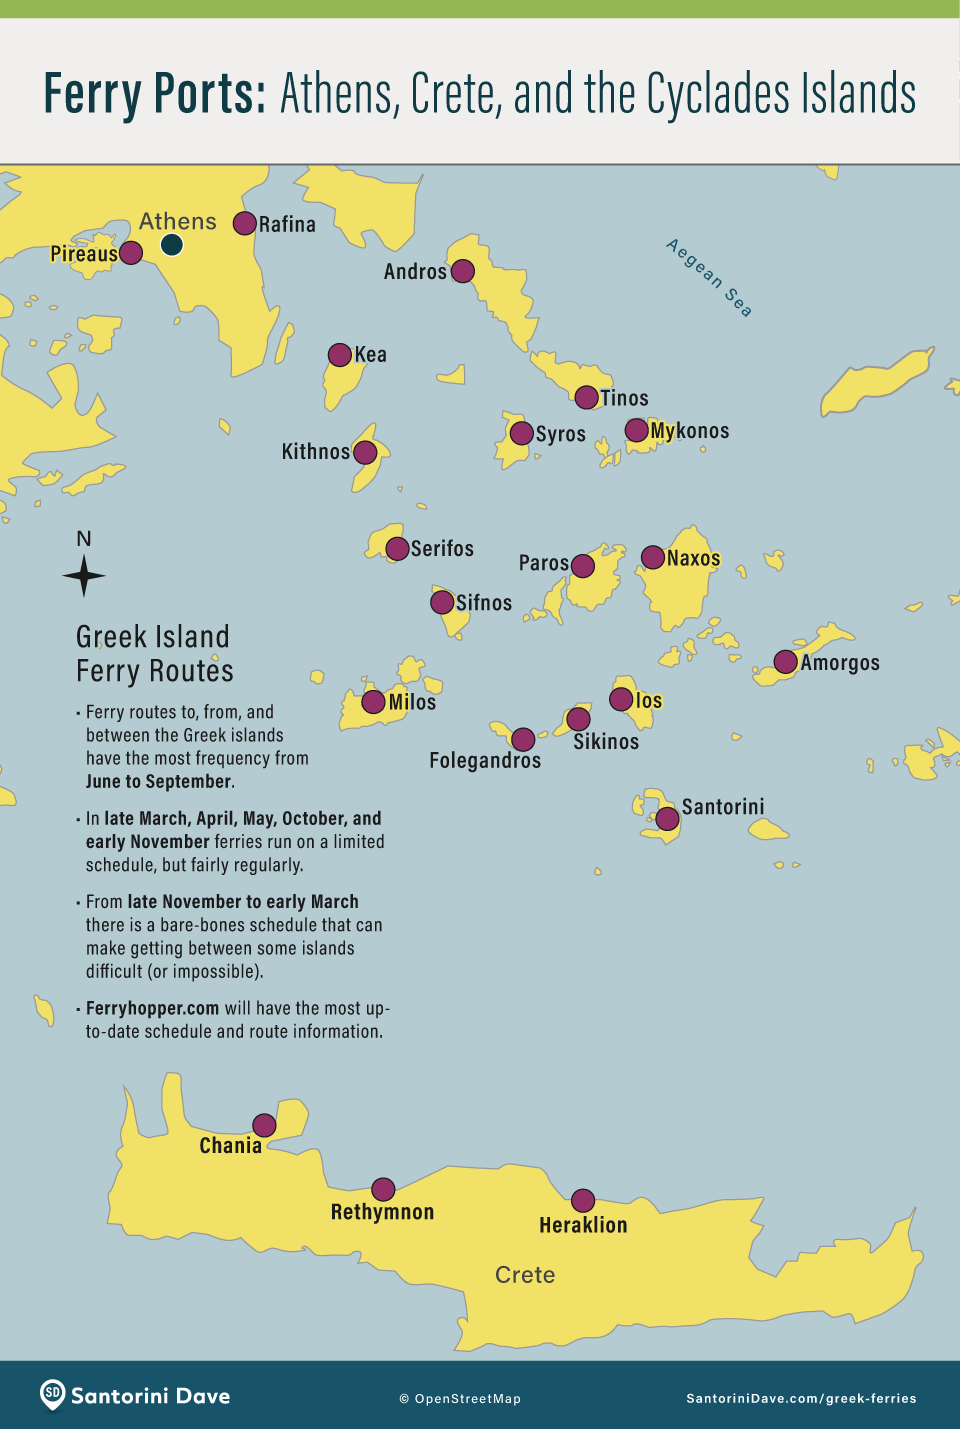 Map showing the ferry routes and ports of the Greek islands.